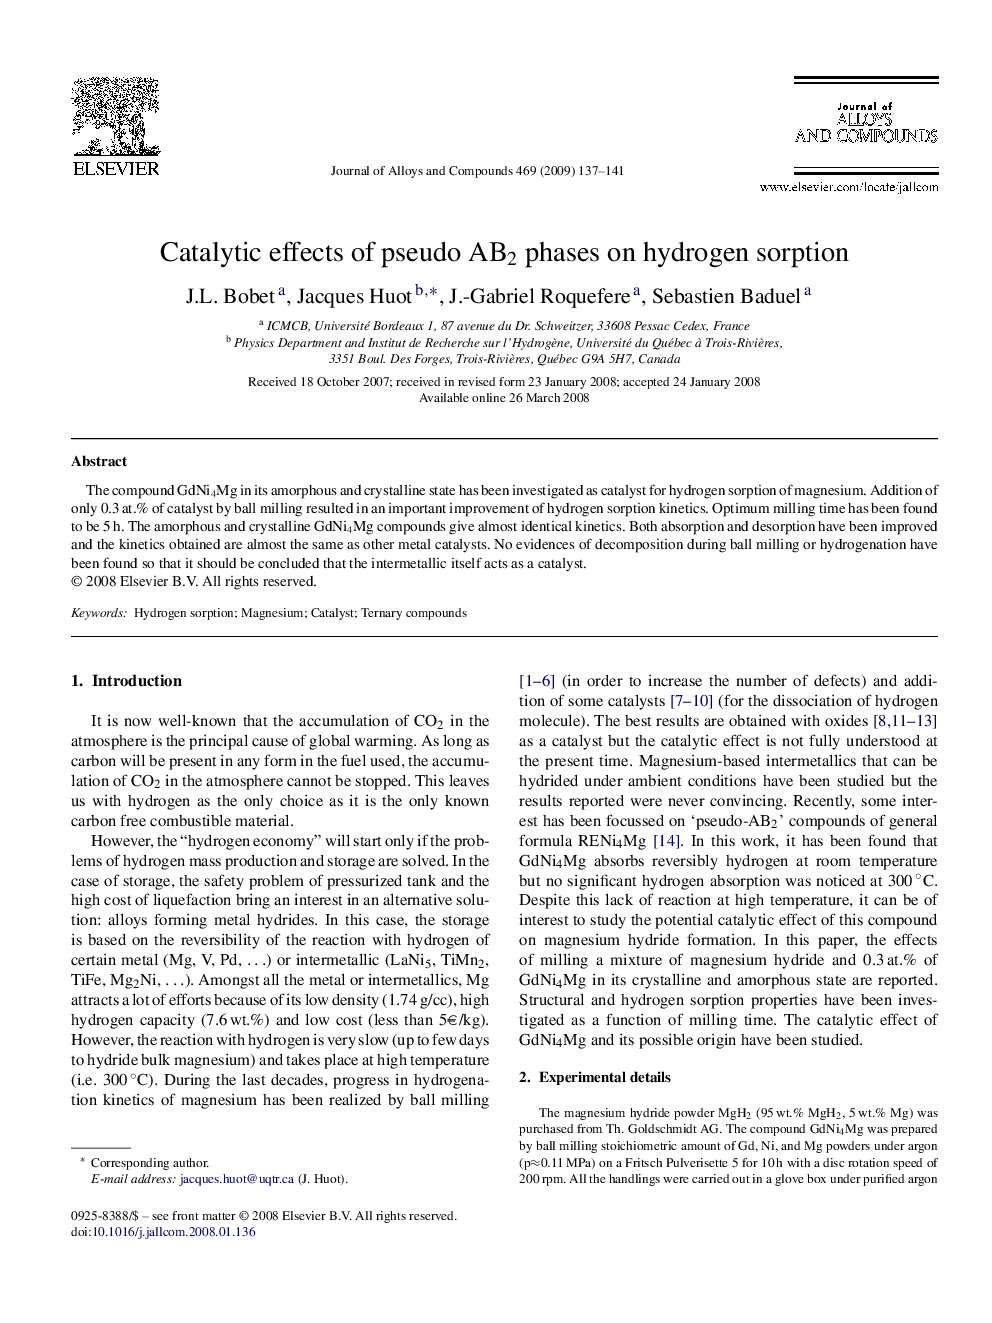 Catalytic effects of pseudo AB2 phases on hydrogen sorption